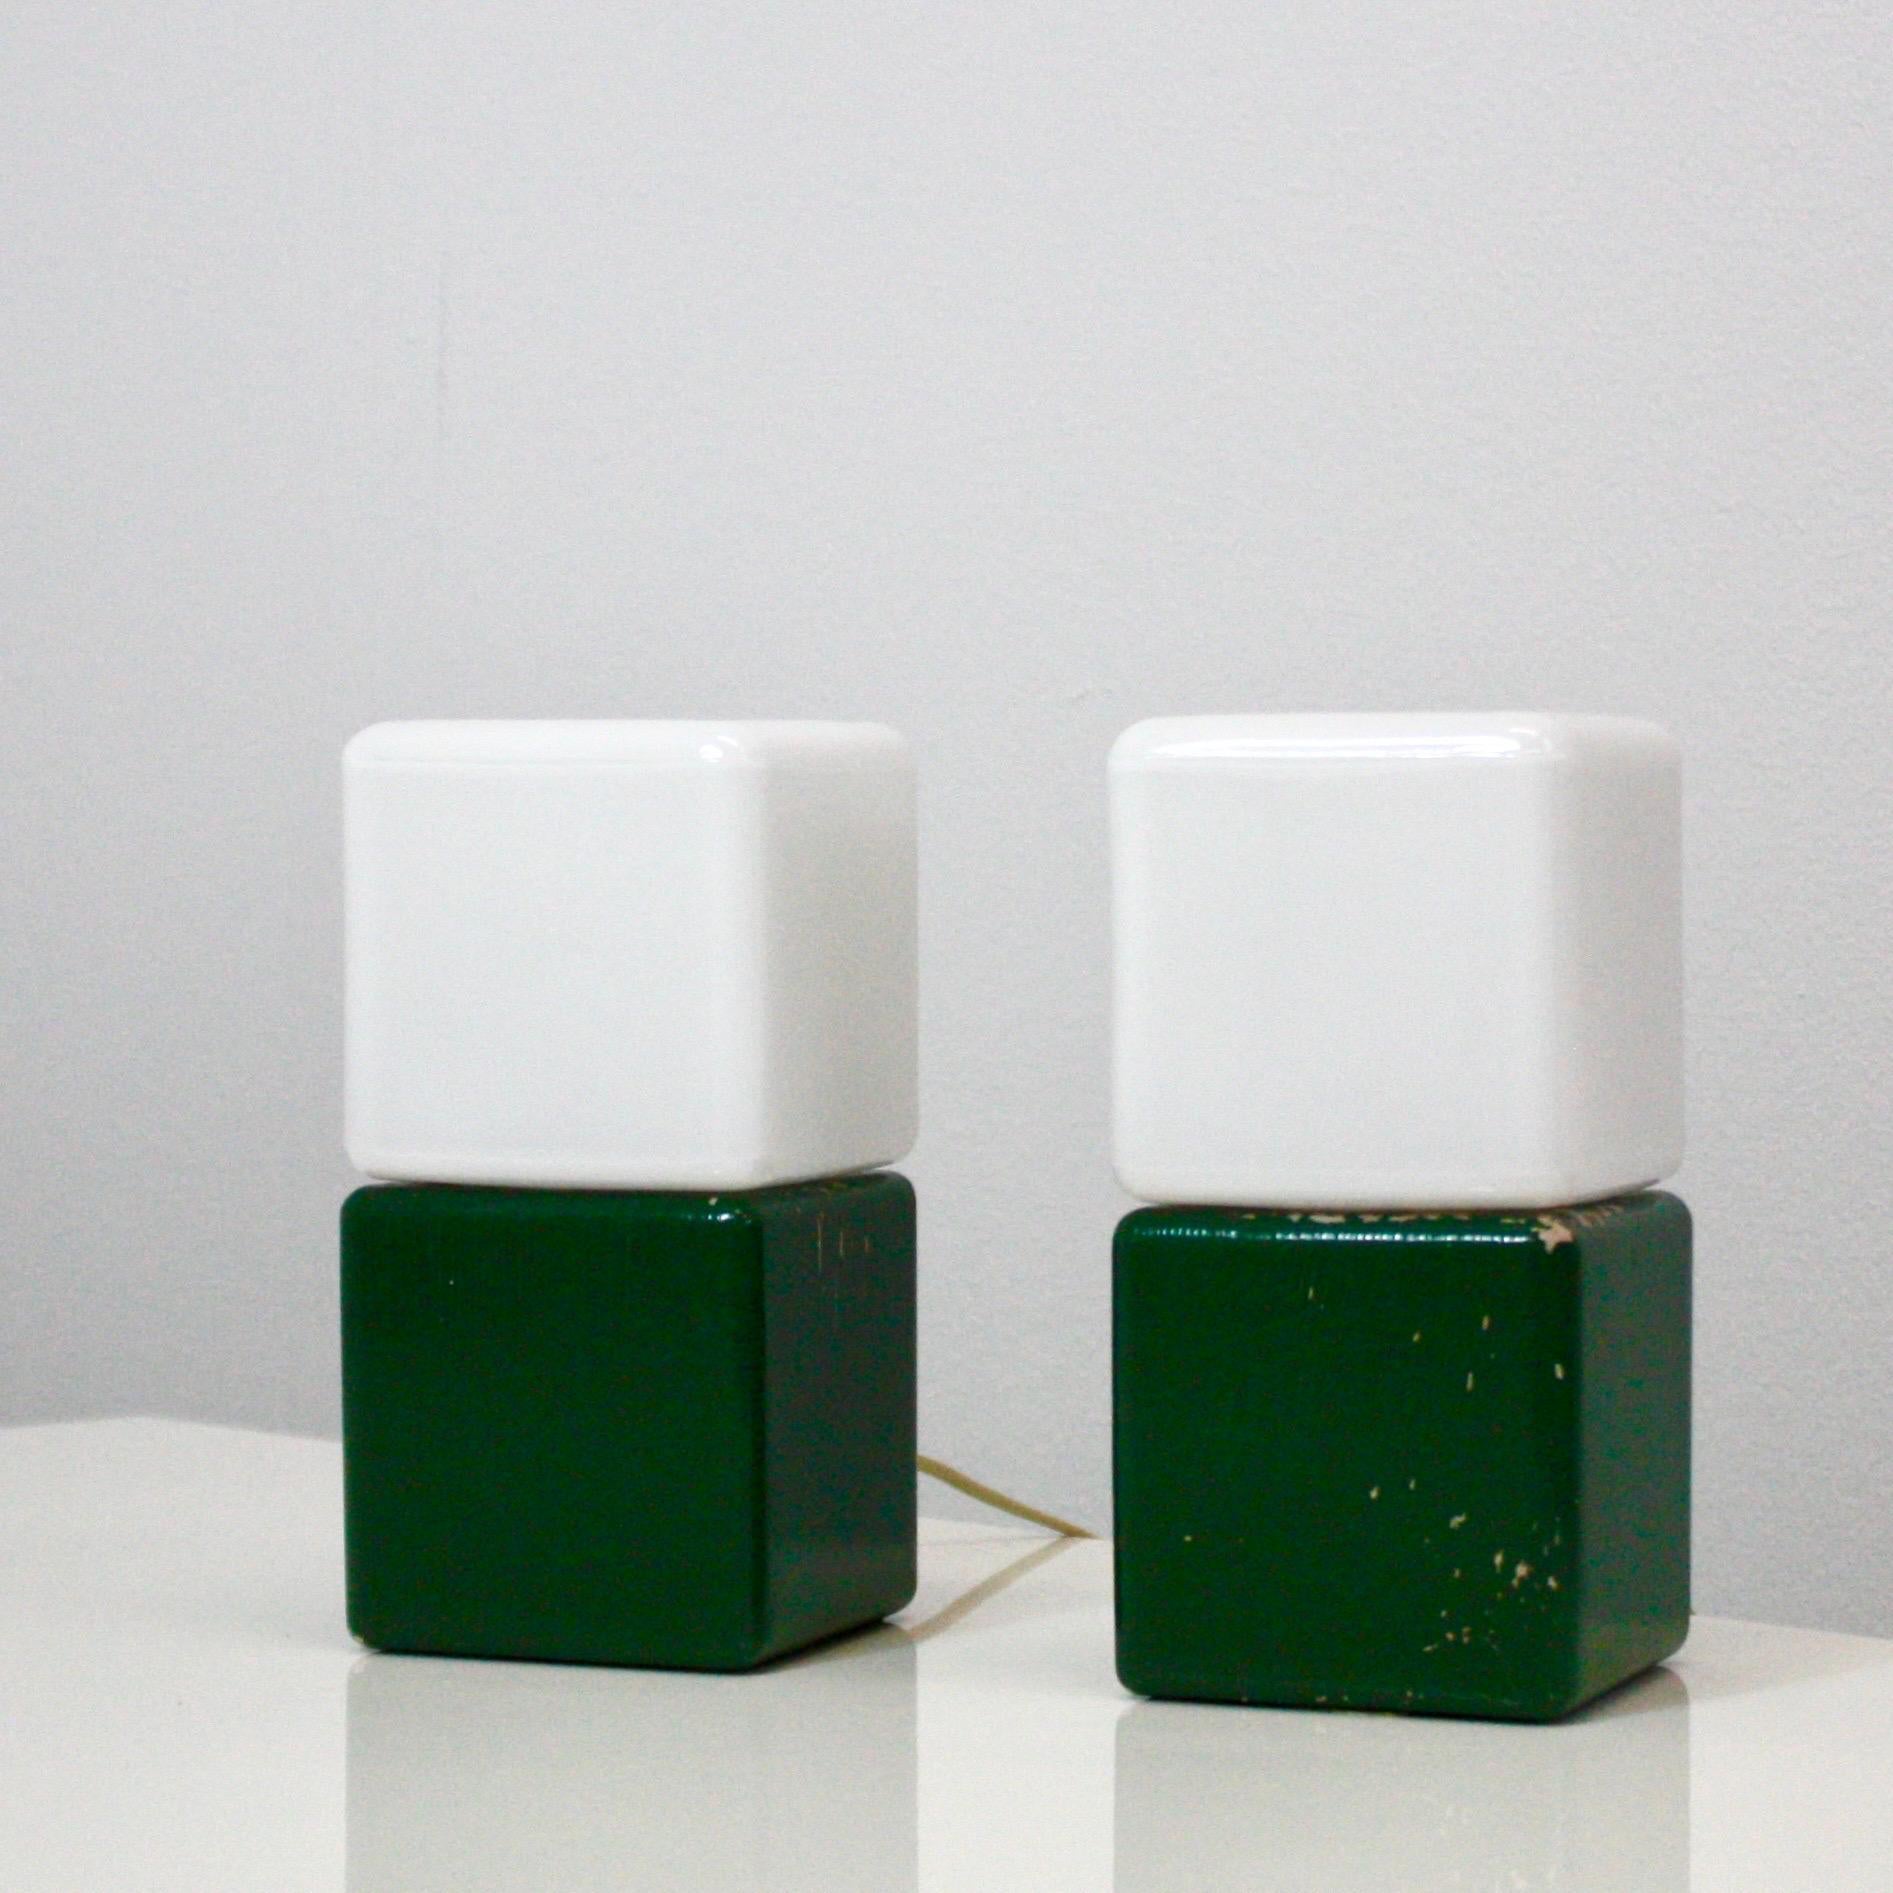 A pair of rare night lamps designed by designer Svend Aage Holm Sørensen in the early 1960s. The lamps feature green wood bases and white glass shades in cubic shapes.

* A pair (2) of green wood and white glass cubic night/desk lamps
* Designer: